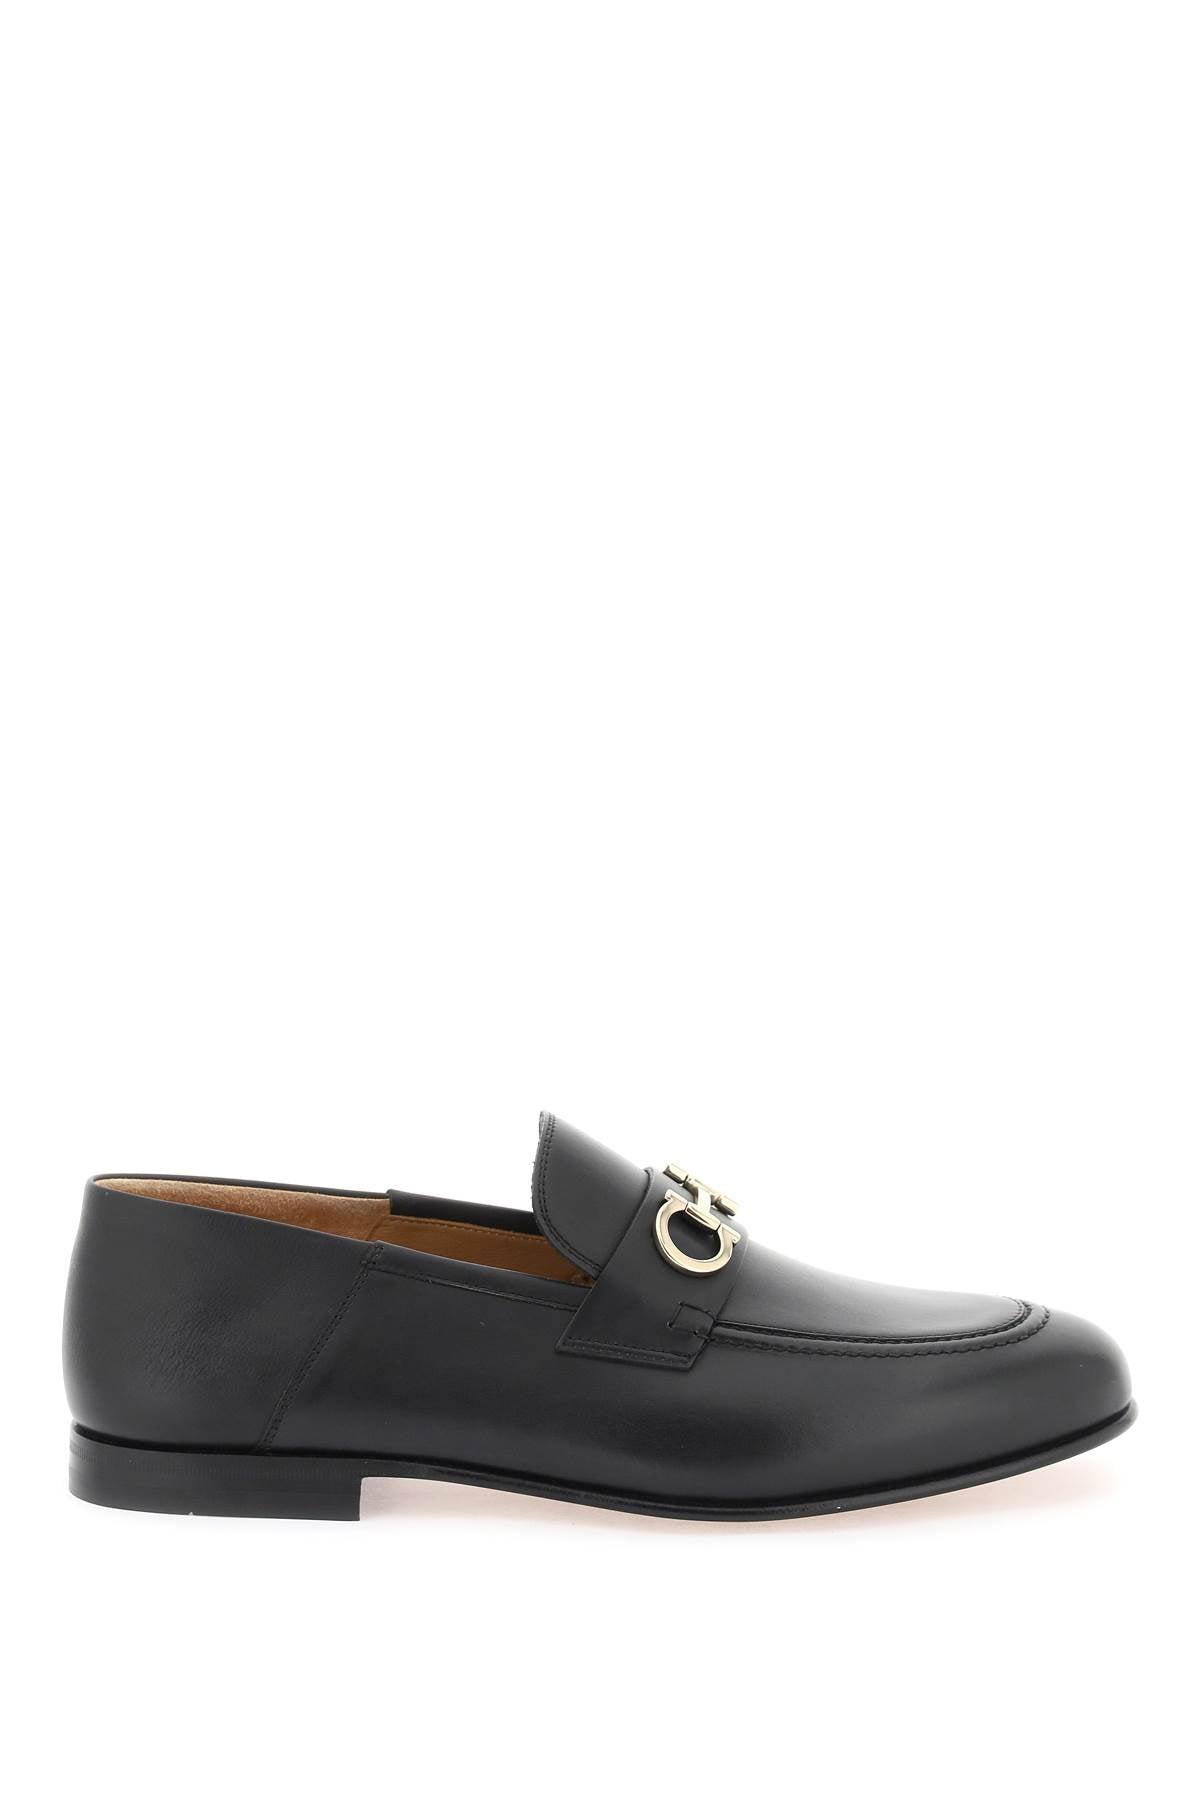 FERRAGAMO Smooth Leather Loafers with Iconic Gold Metal Detail for Men